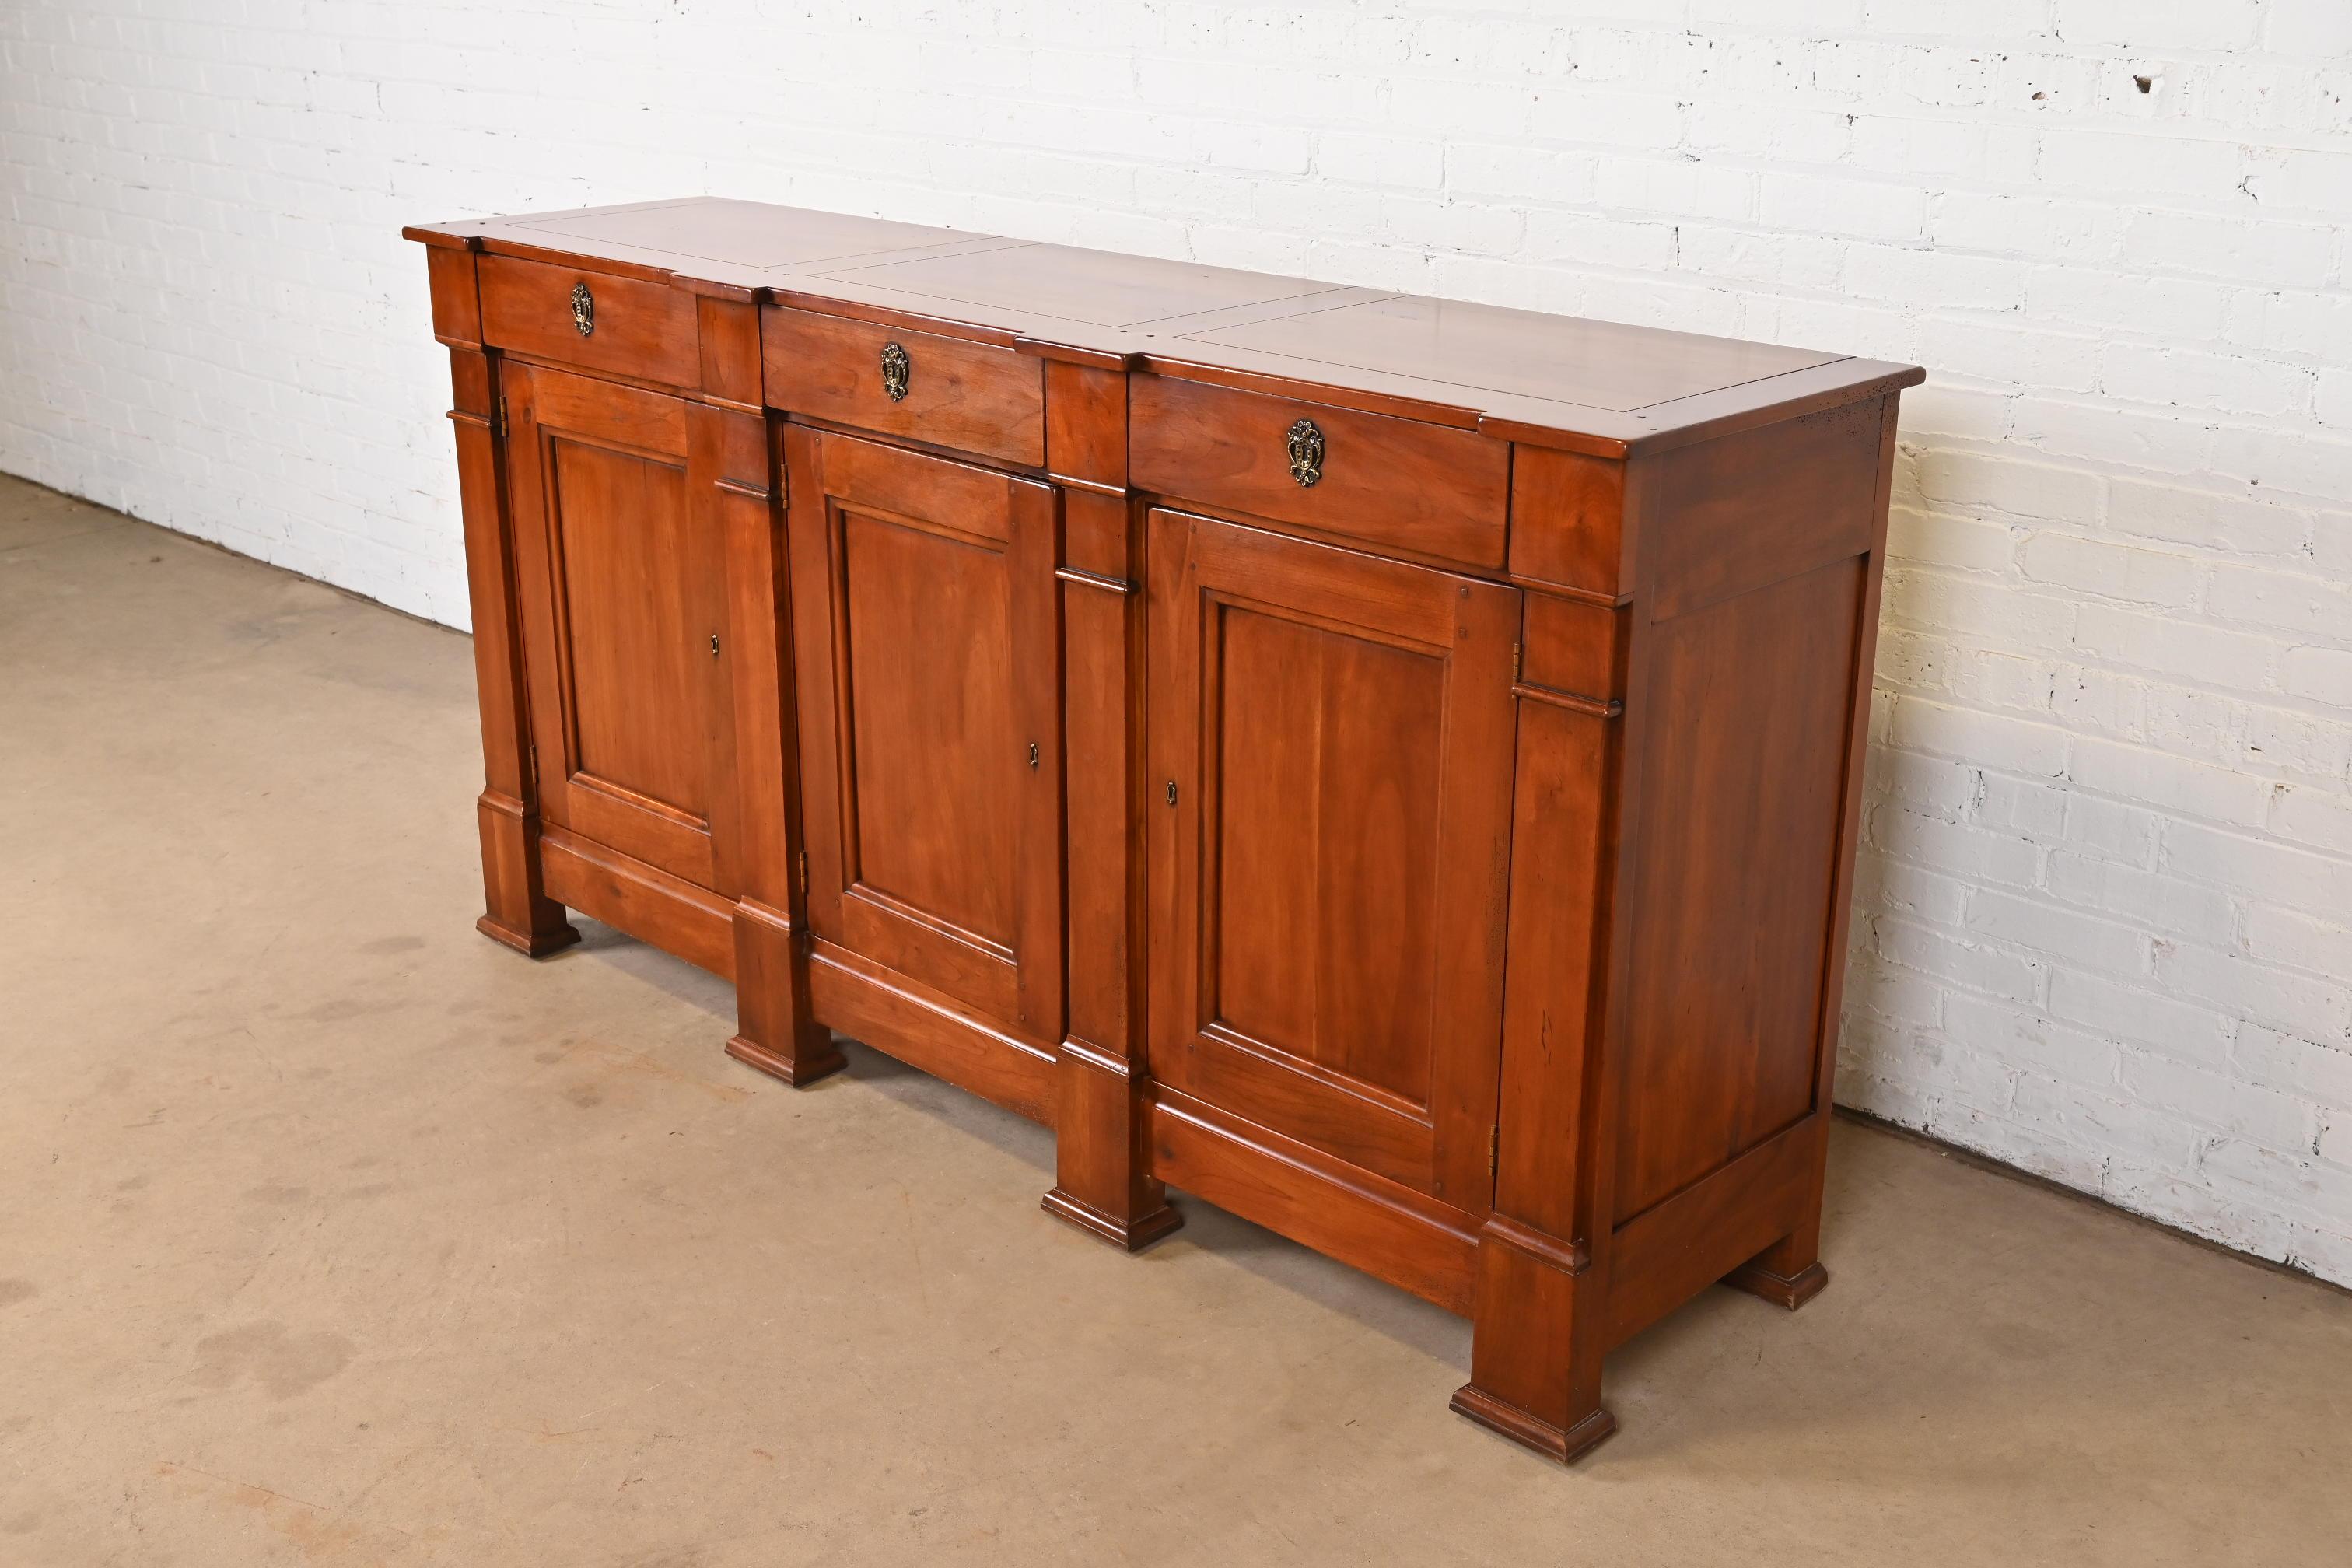 American Henredon Italian Empire Carved Cherry Wood Sideboard or Bar Cabinet